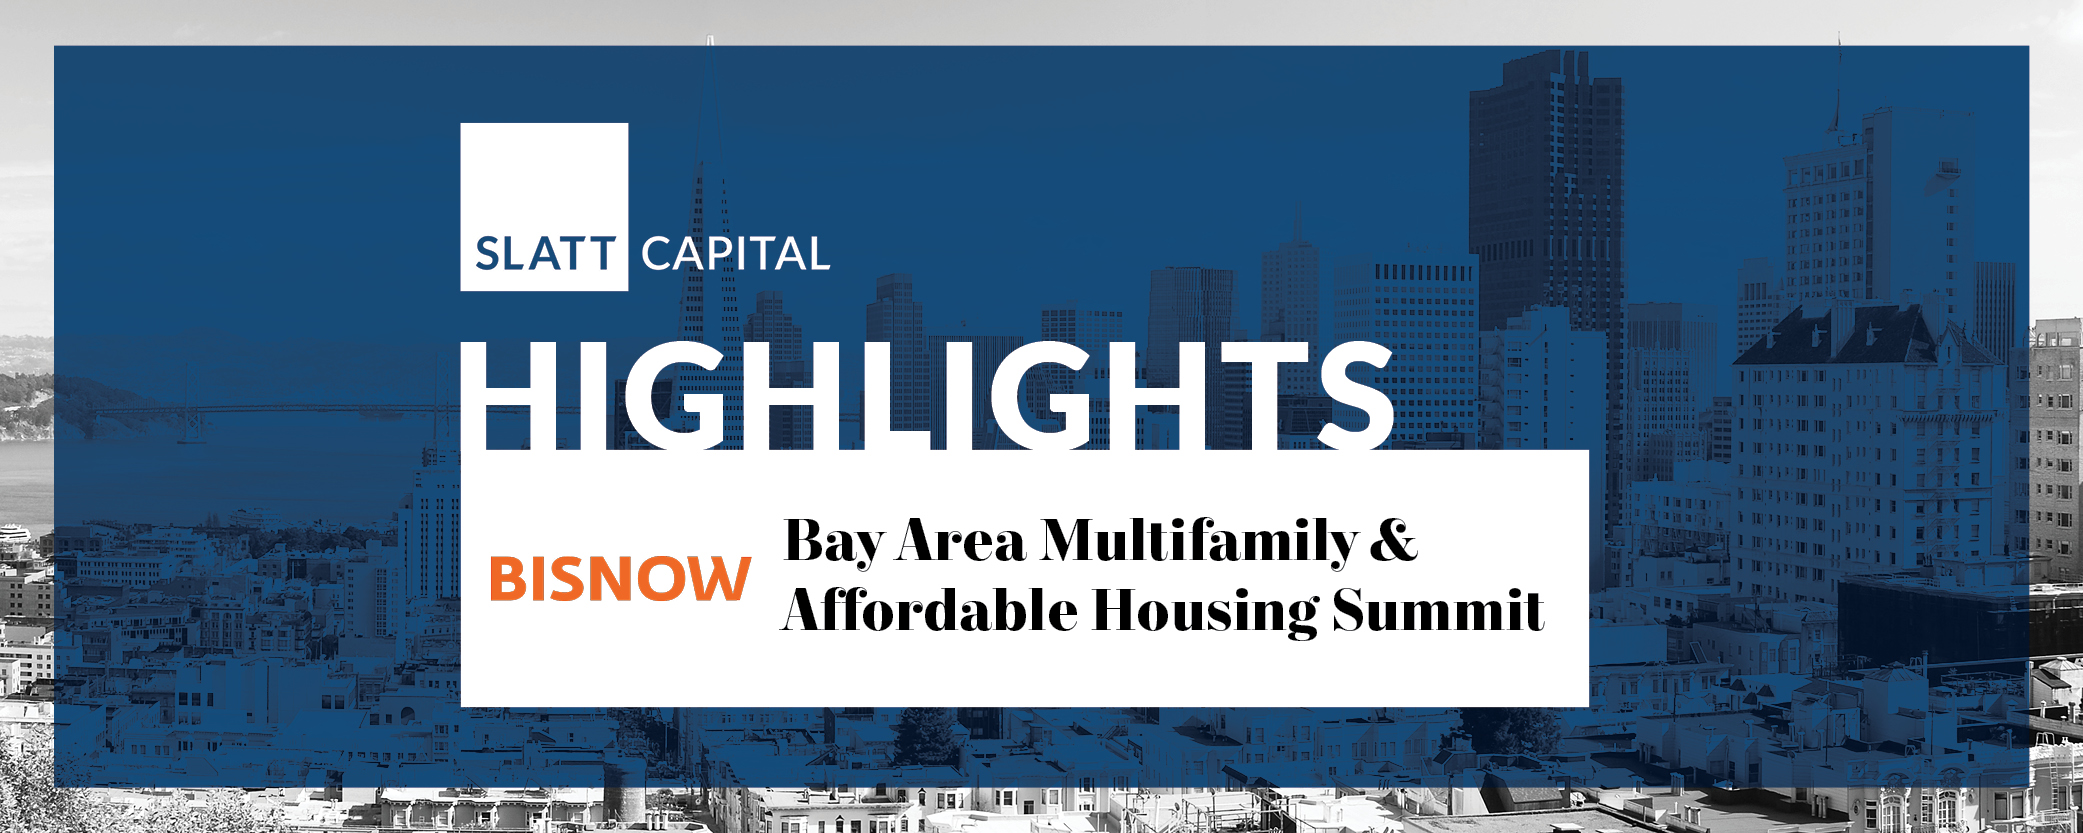 Highlights: bisnow bay area multifamily & affordable housing summit